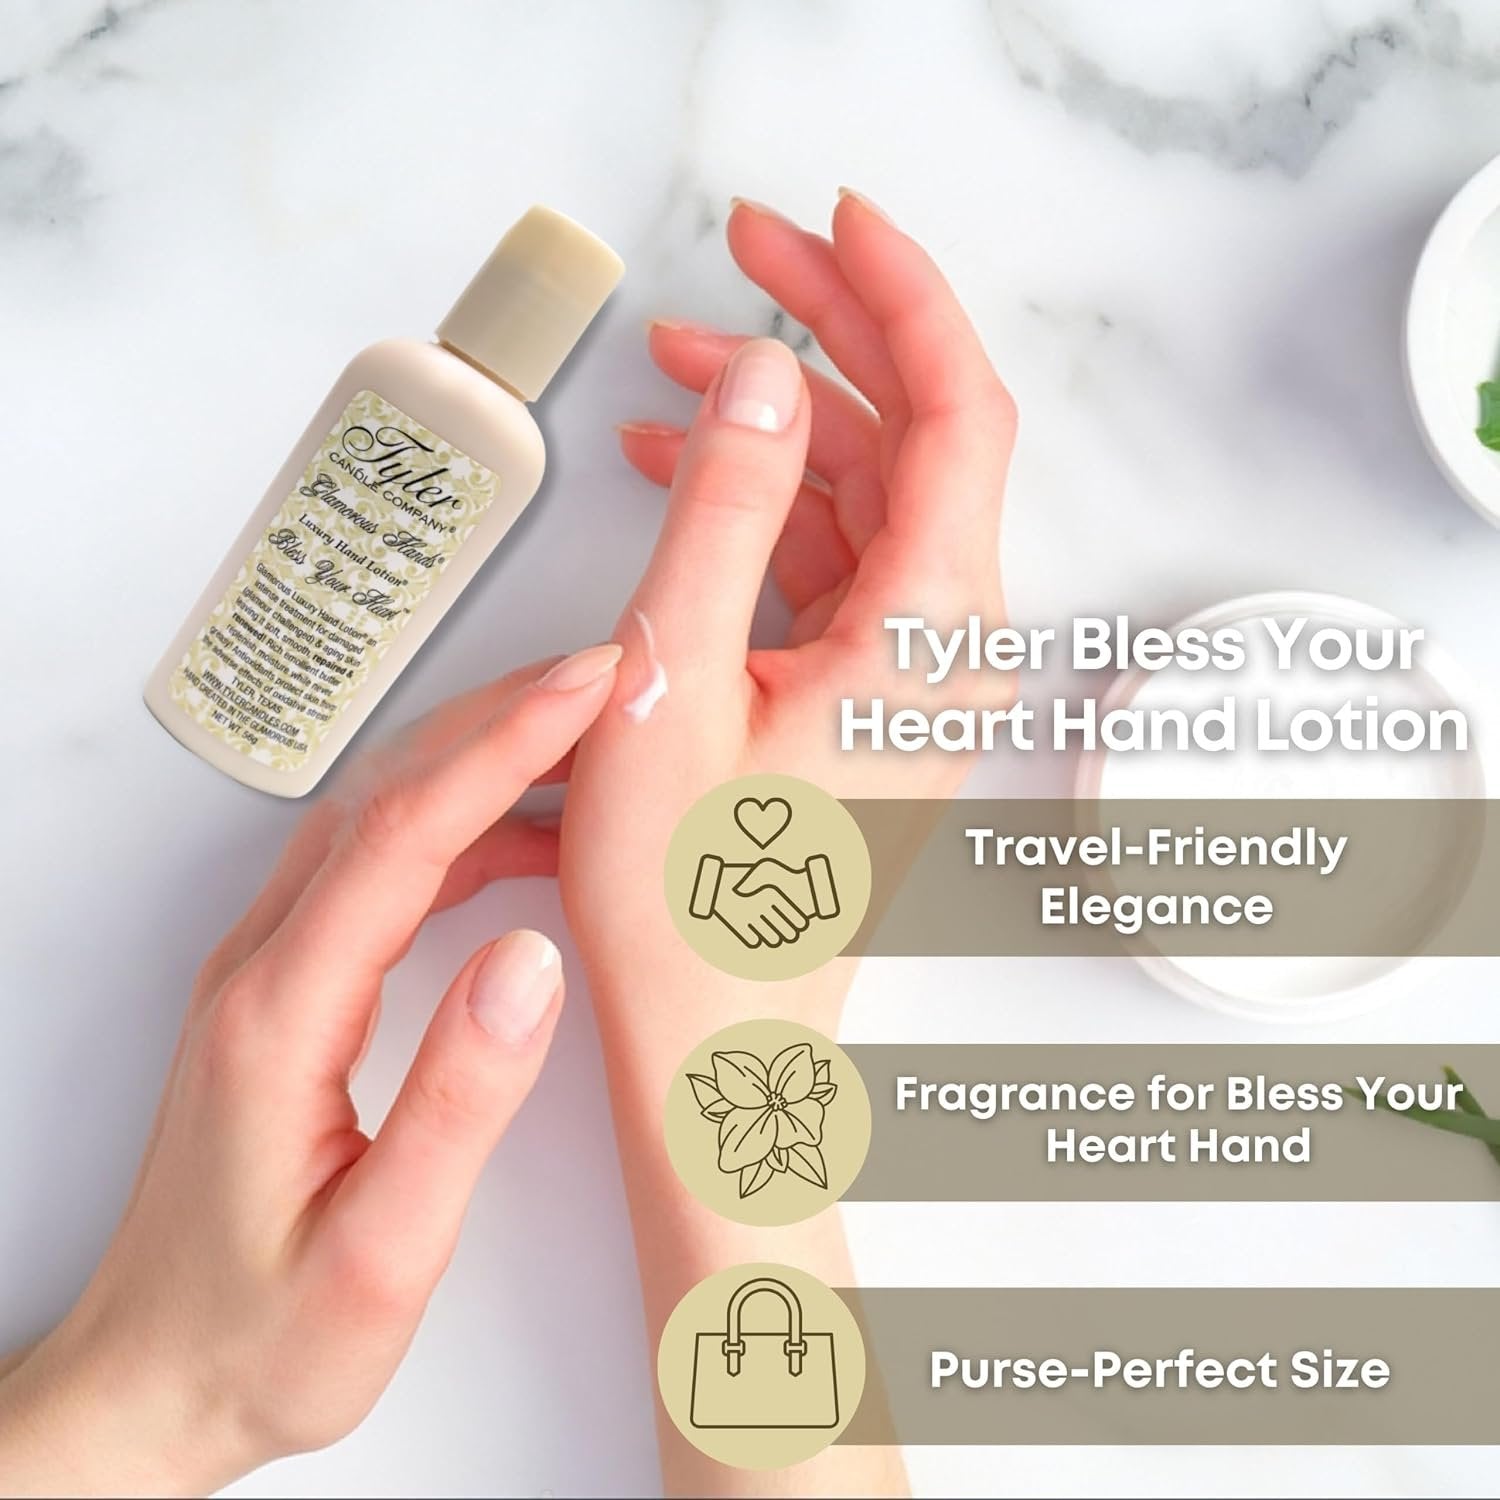 Worldwide Nutrition Bundle, 2 Items: Tyler Bless Your Heart Hand Lotion - Scented and Small Hand Cream For Dry Hands- 2 Oz Travel Size Luxury Hand Moisturizer and Multi-Purpose Key Chain